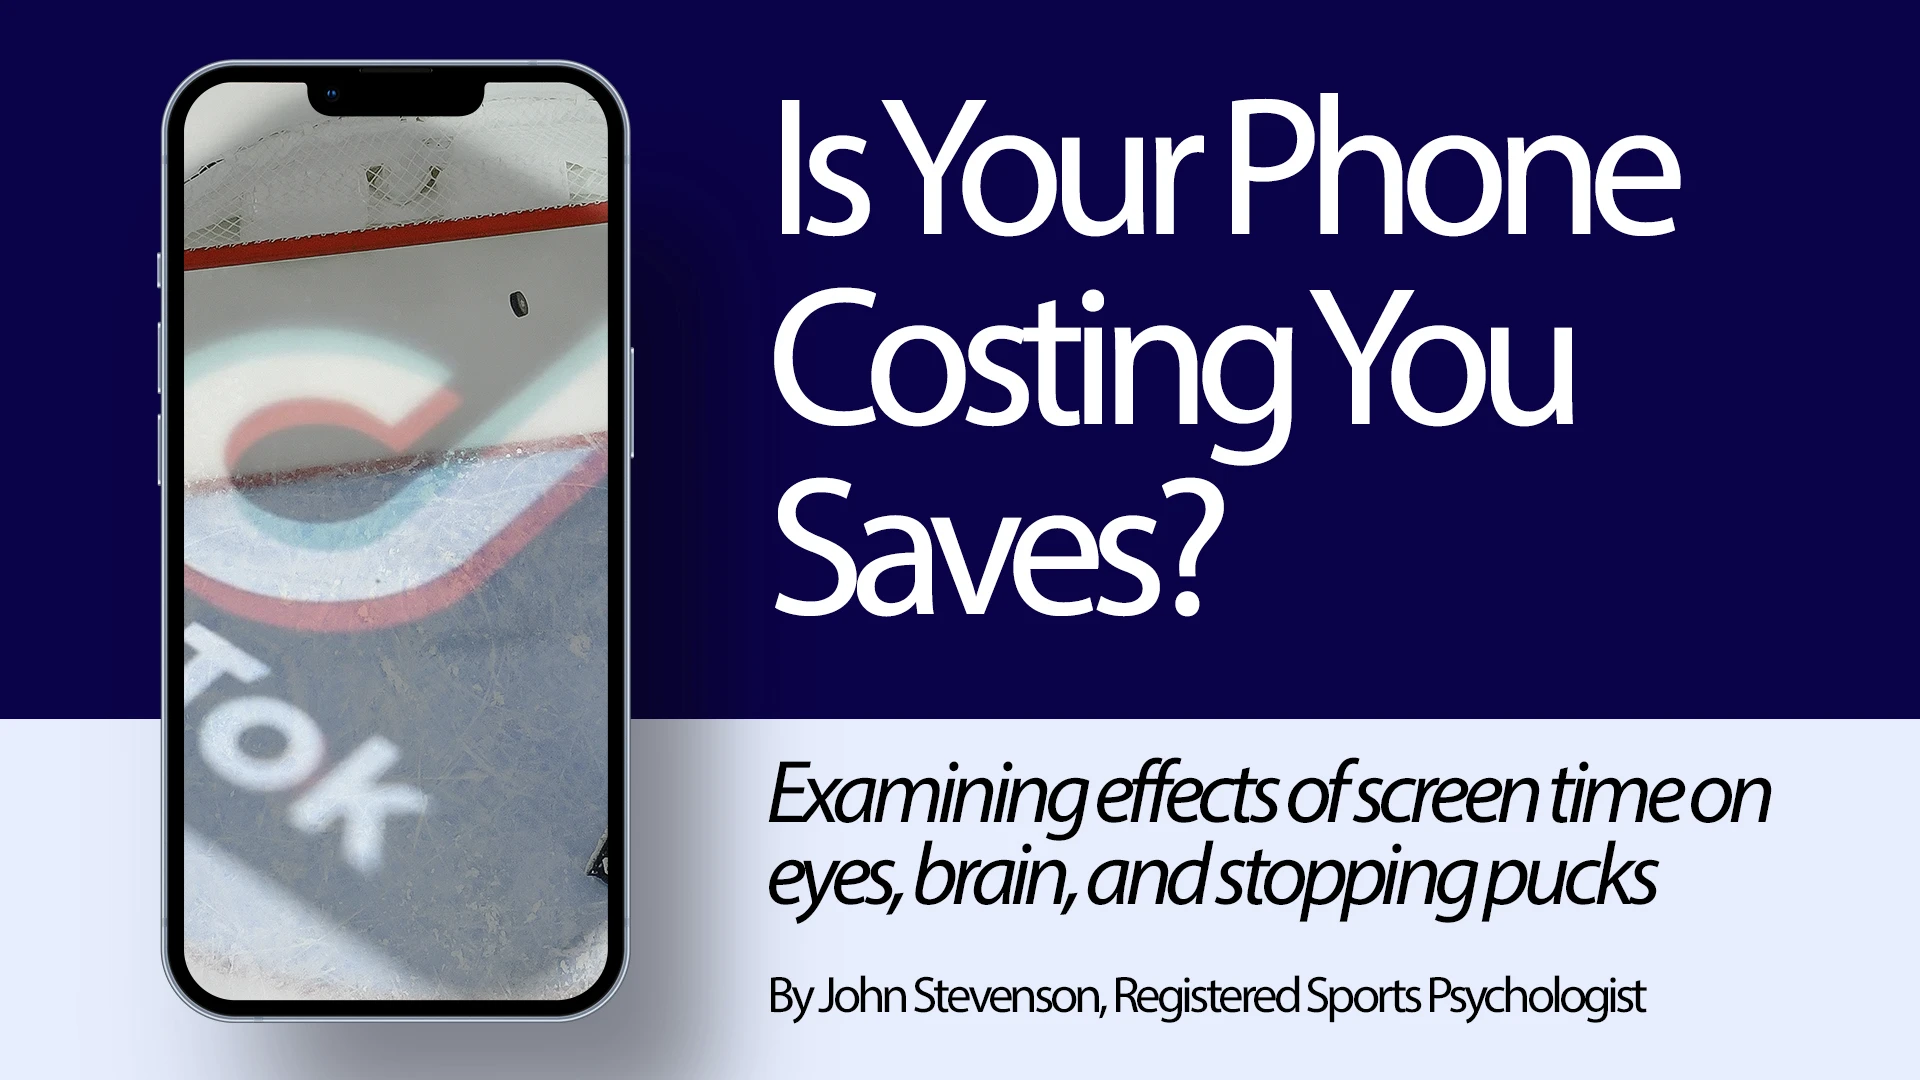 Is Your Phone Costing You Saves?